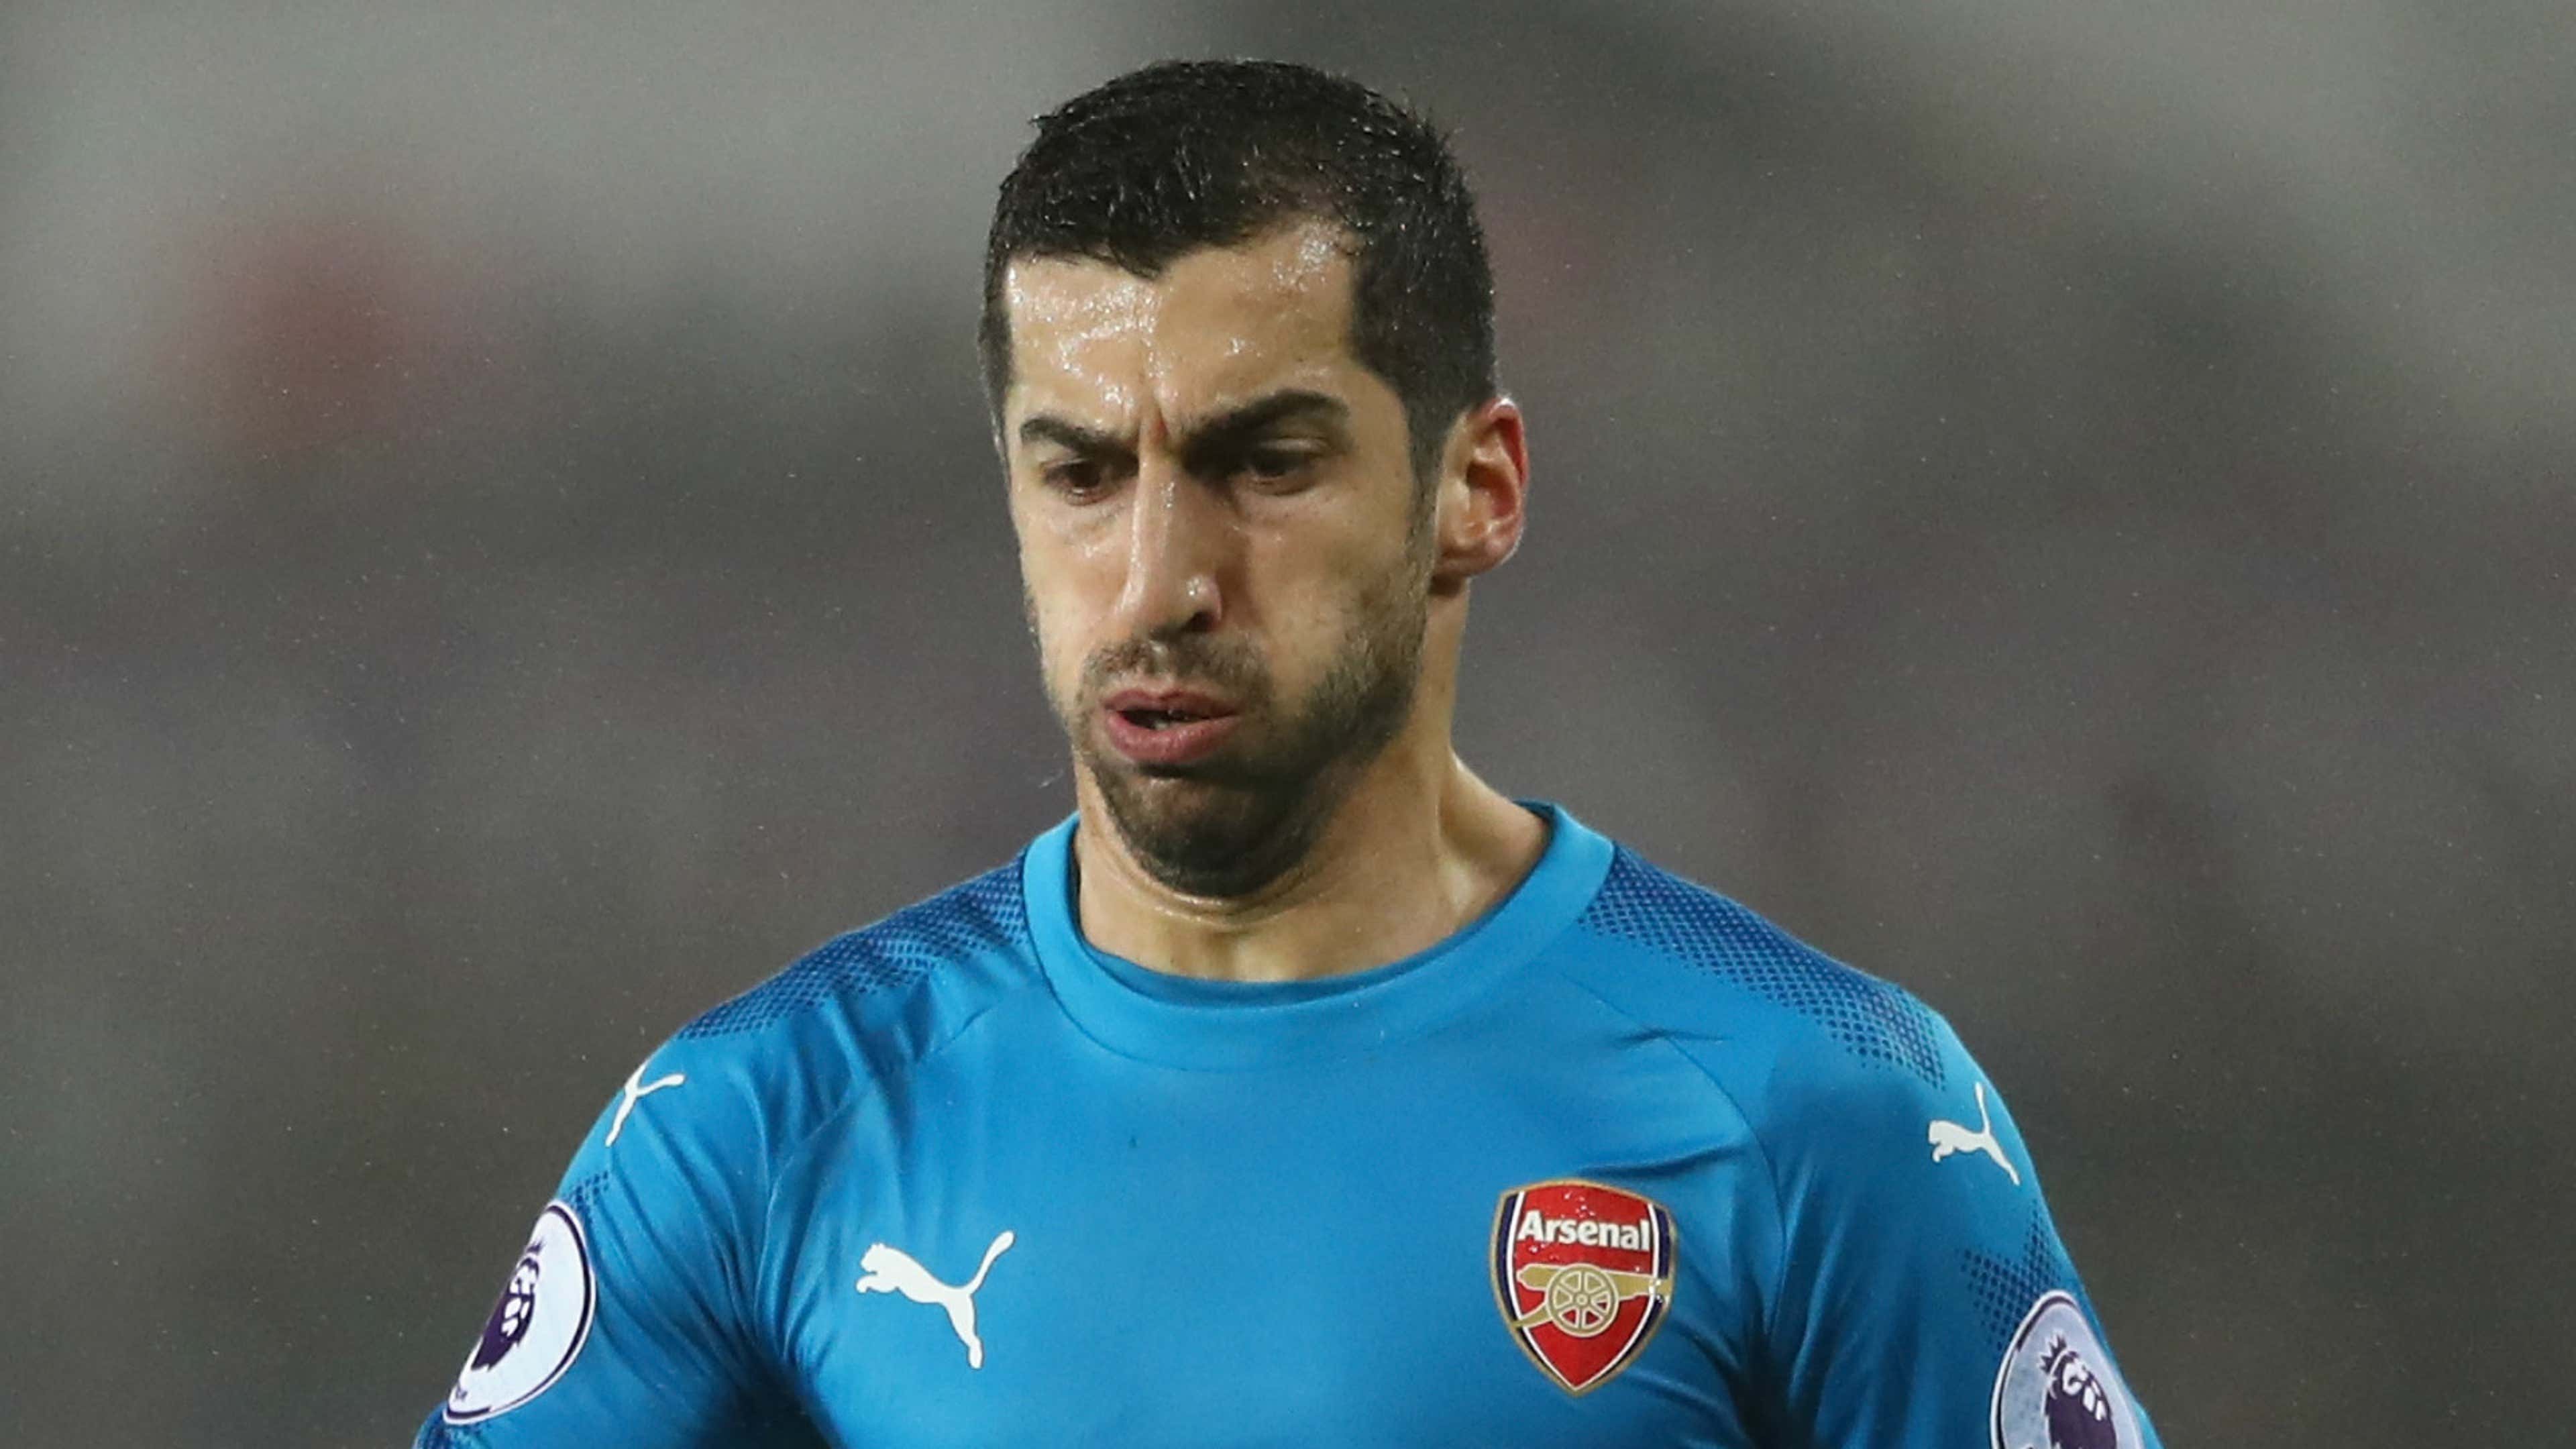 Arsenal's Henrikh Mkhitaryan is wearing No.77 in the Europa League - this  is why - Birmingham Live